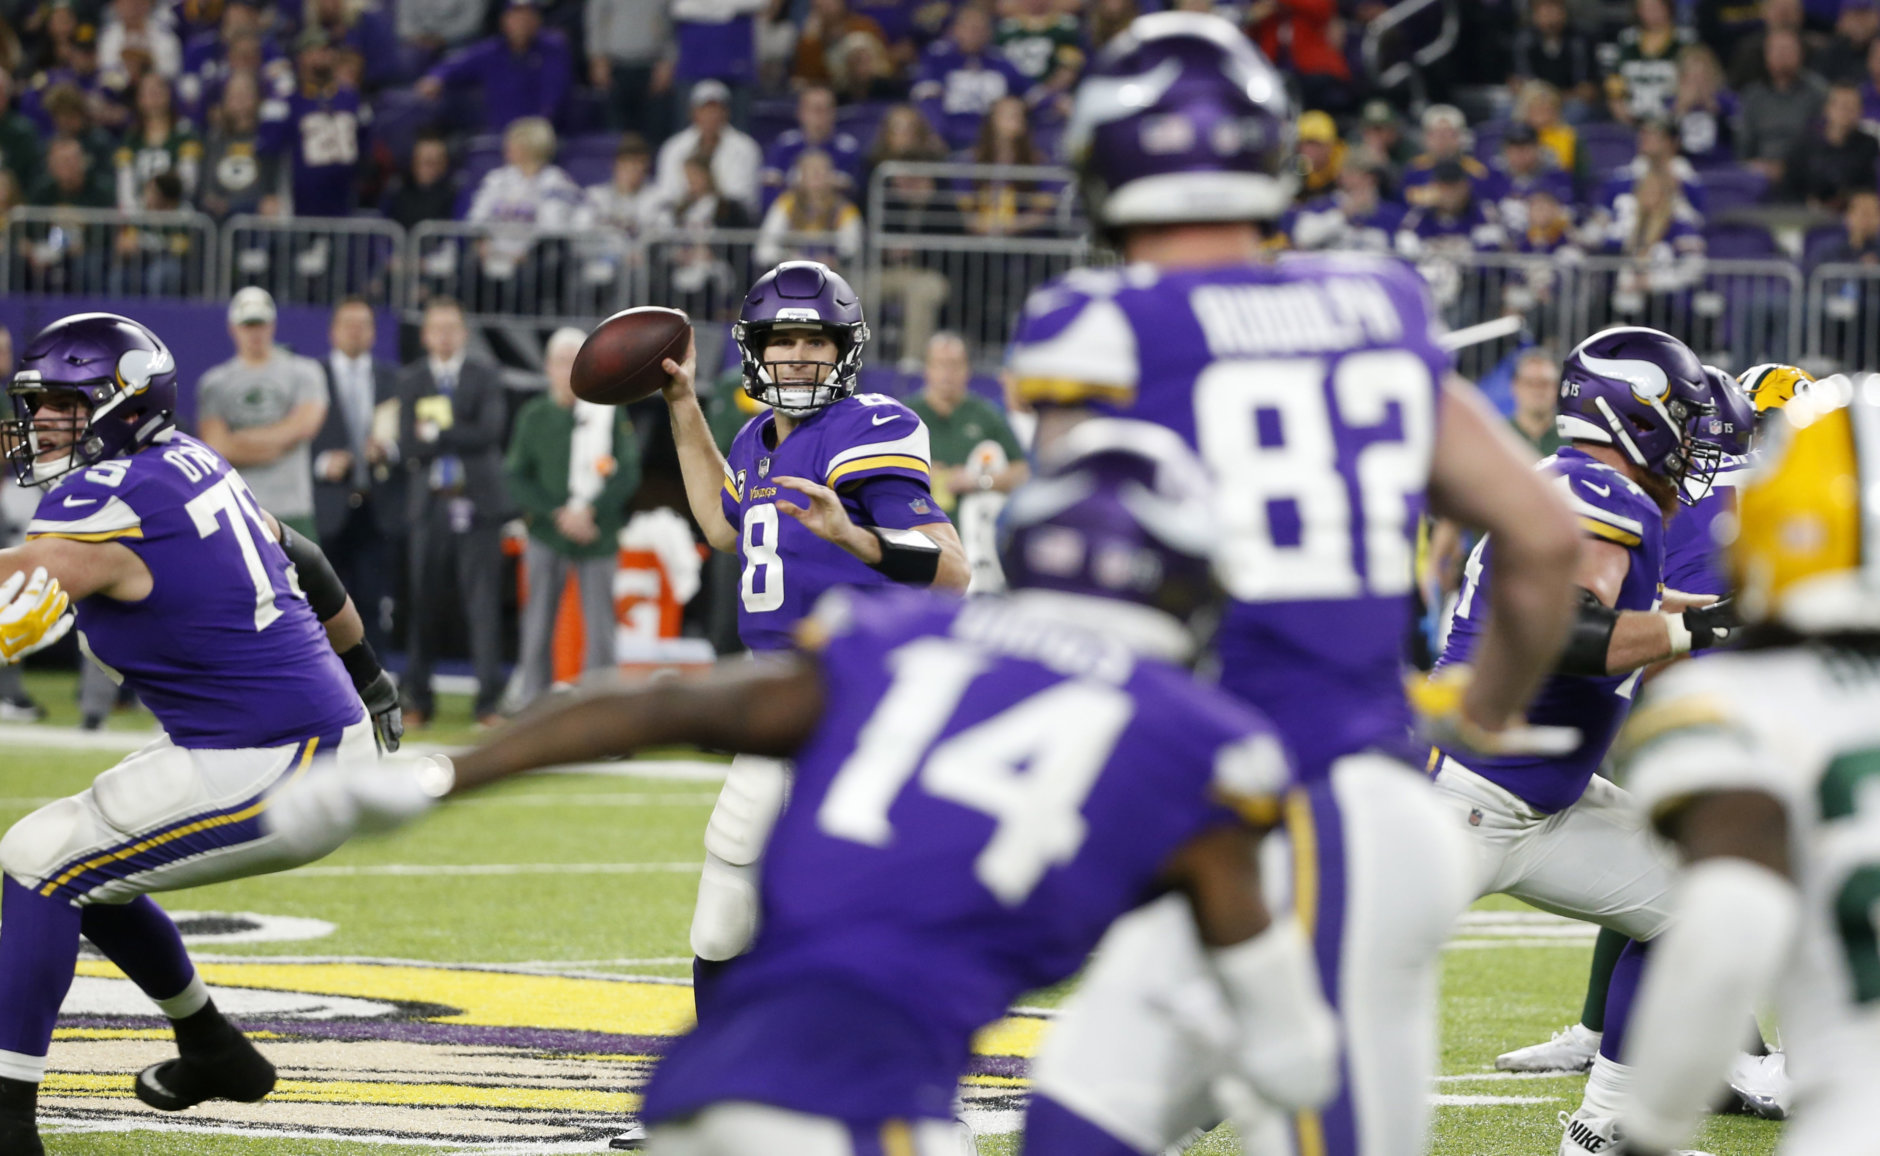 Minnesota Vikings quarterback Kirk Cousins (8) throws a pass during the second half of an NFL football game against the Green Bay Packers, Sunday, Nov. 25, 2018, in Minneapolis. The Vikings won 24-17. (AP Photo/Bruce Kluckhohn)